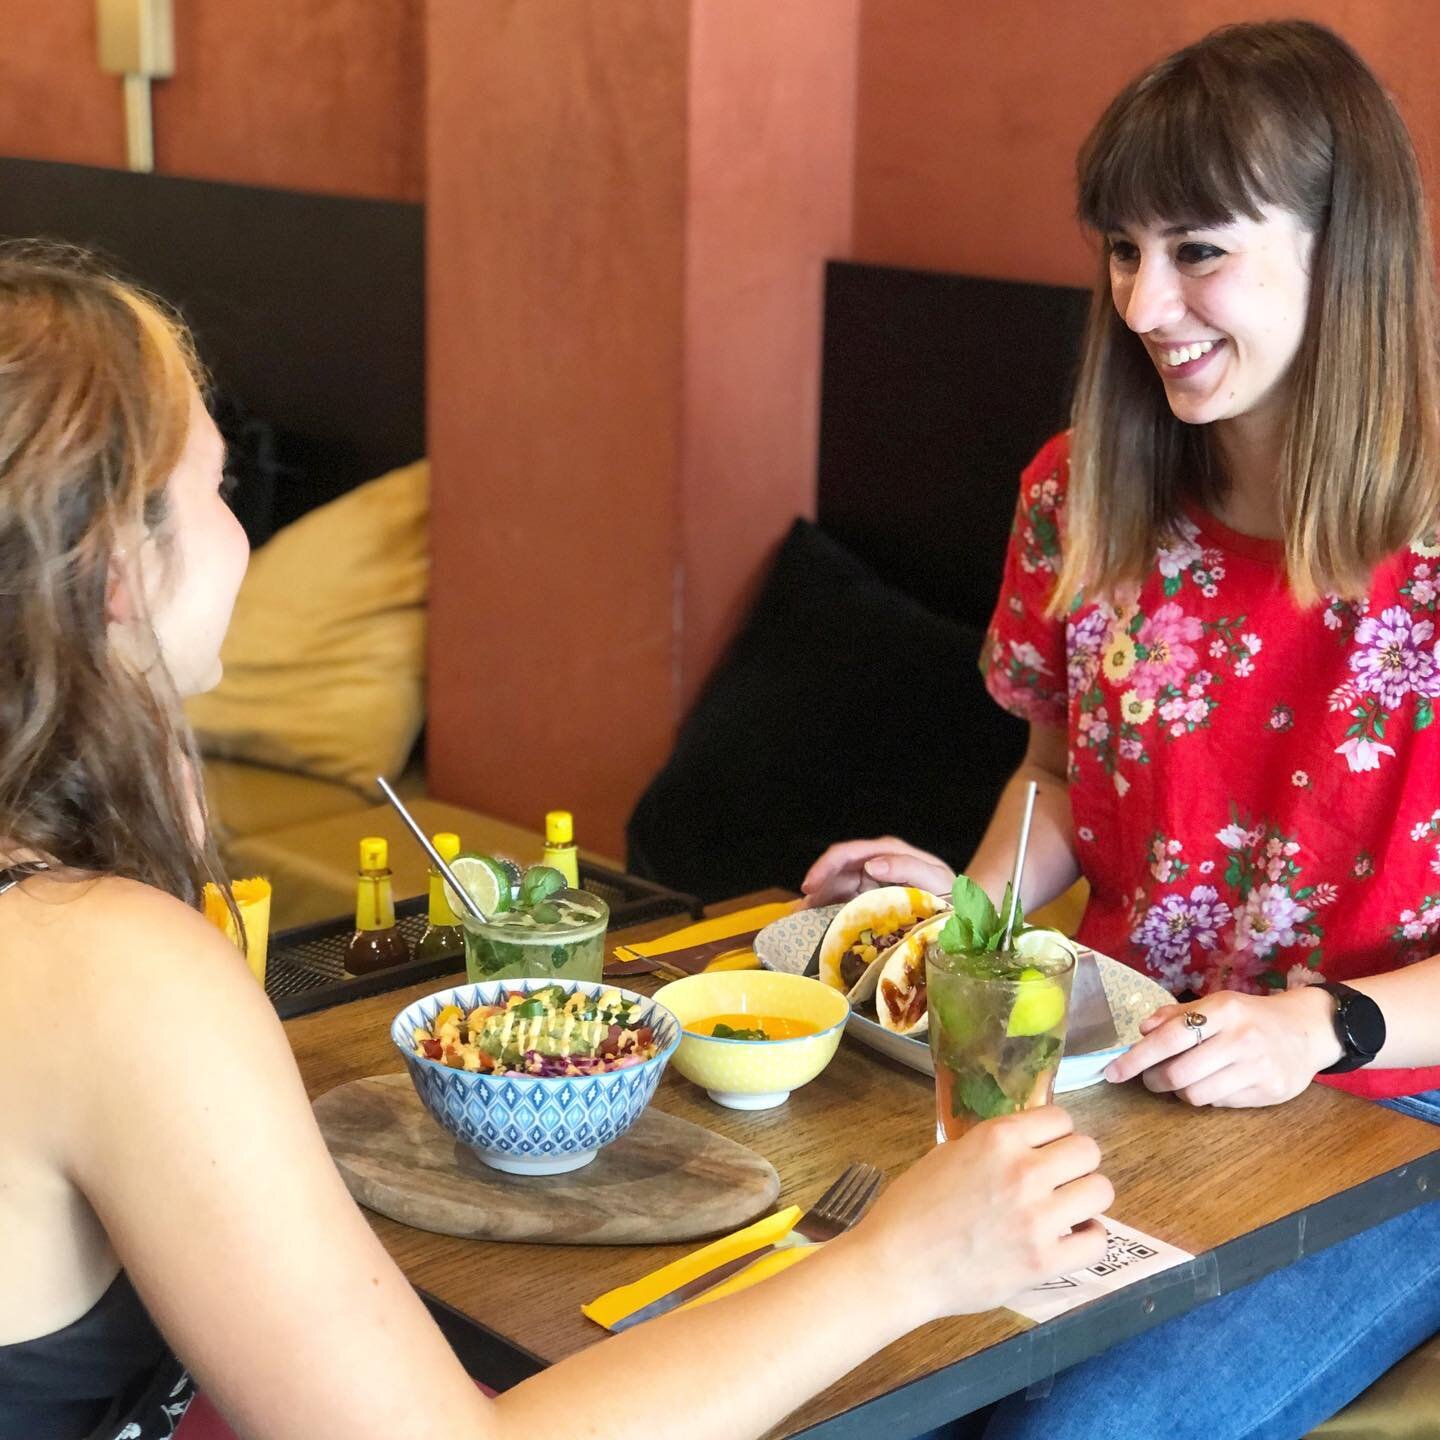 Good food and friends, what more could you ask for ? 🥳🌮🌵 &thinsp;
&thinsp;
#ancho #anchobelgium #mexicanplace #mexicanbrussels #friends #goodtime